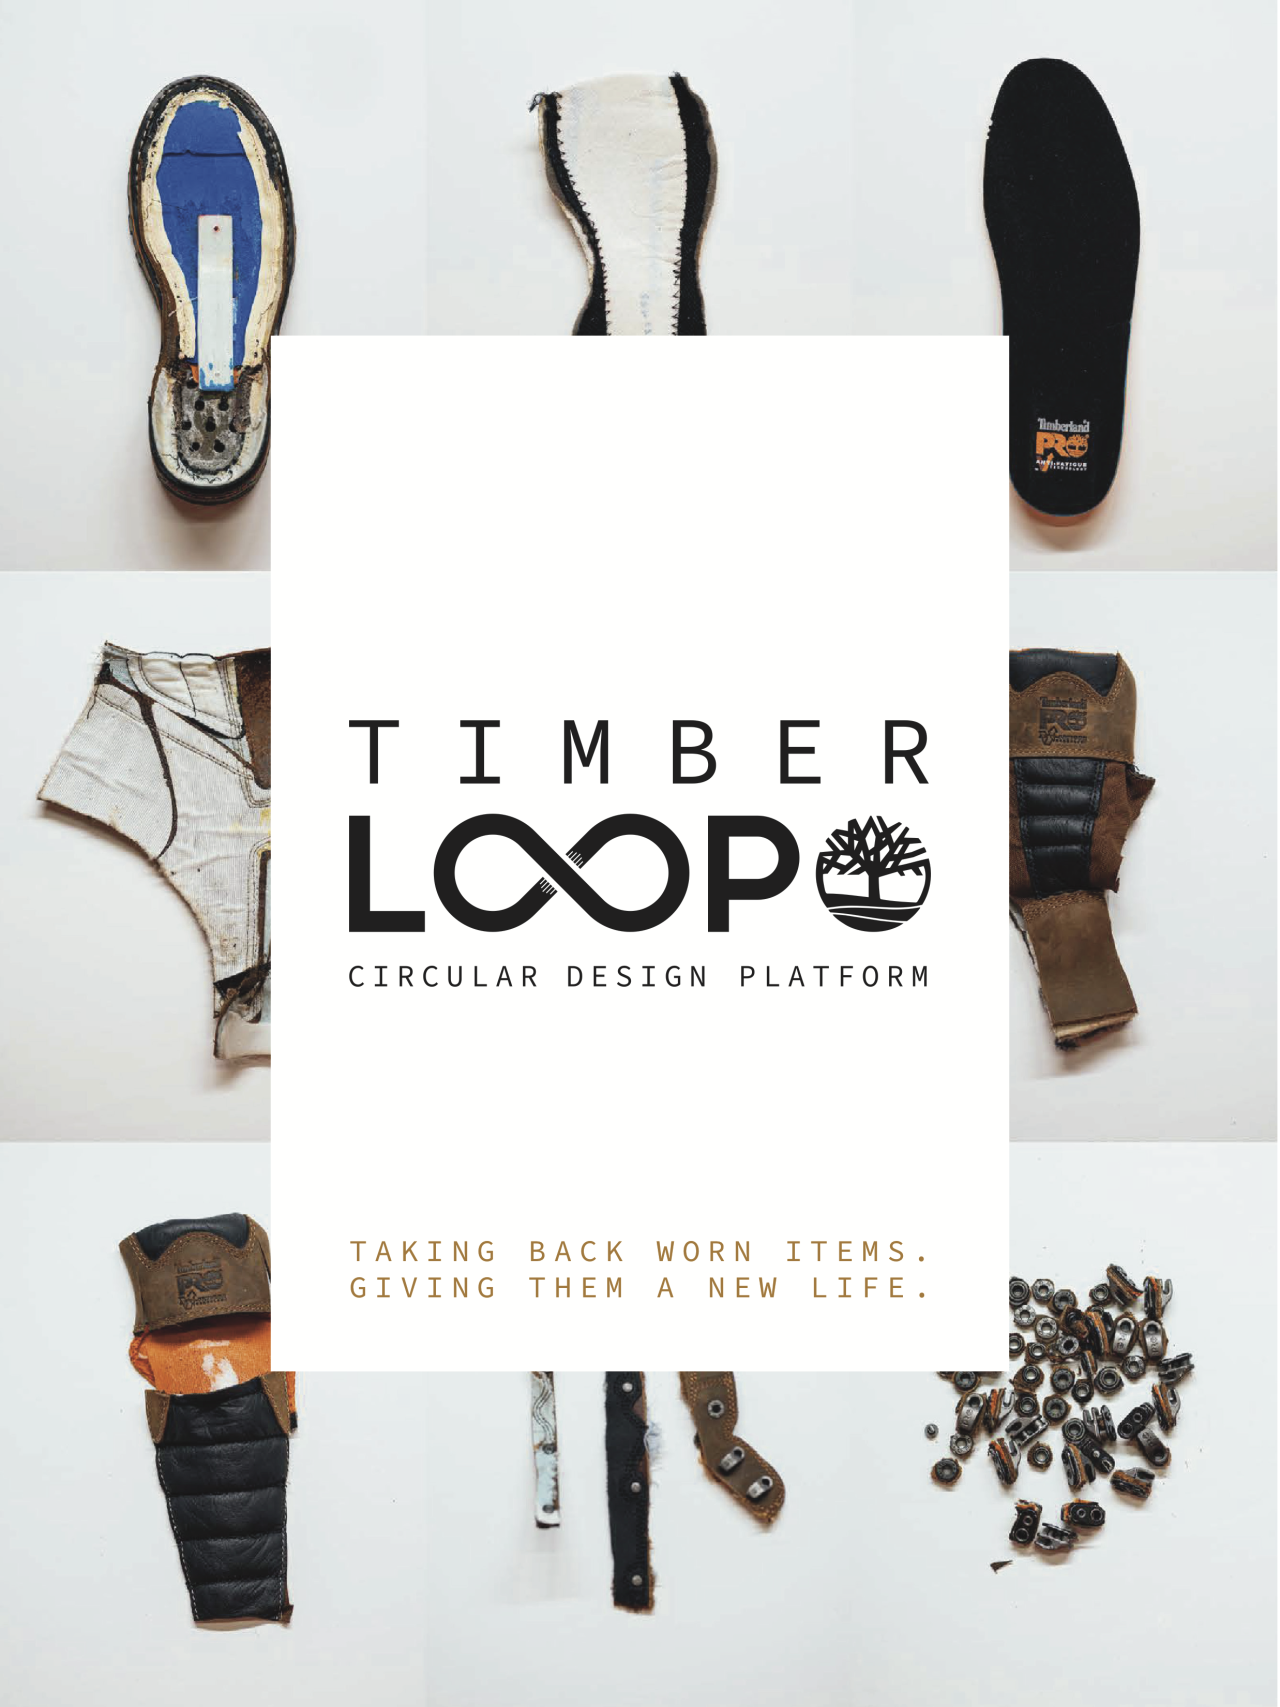 Timberloop logo over Timberland products with words "Circular Design Platform, Taking Back Worn Items, Giving Them A New Life"